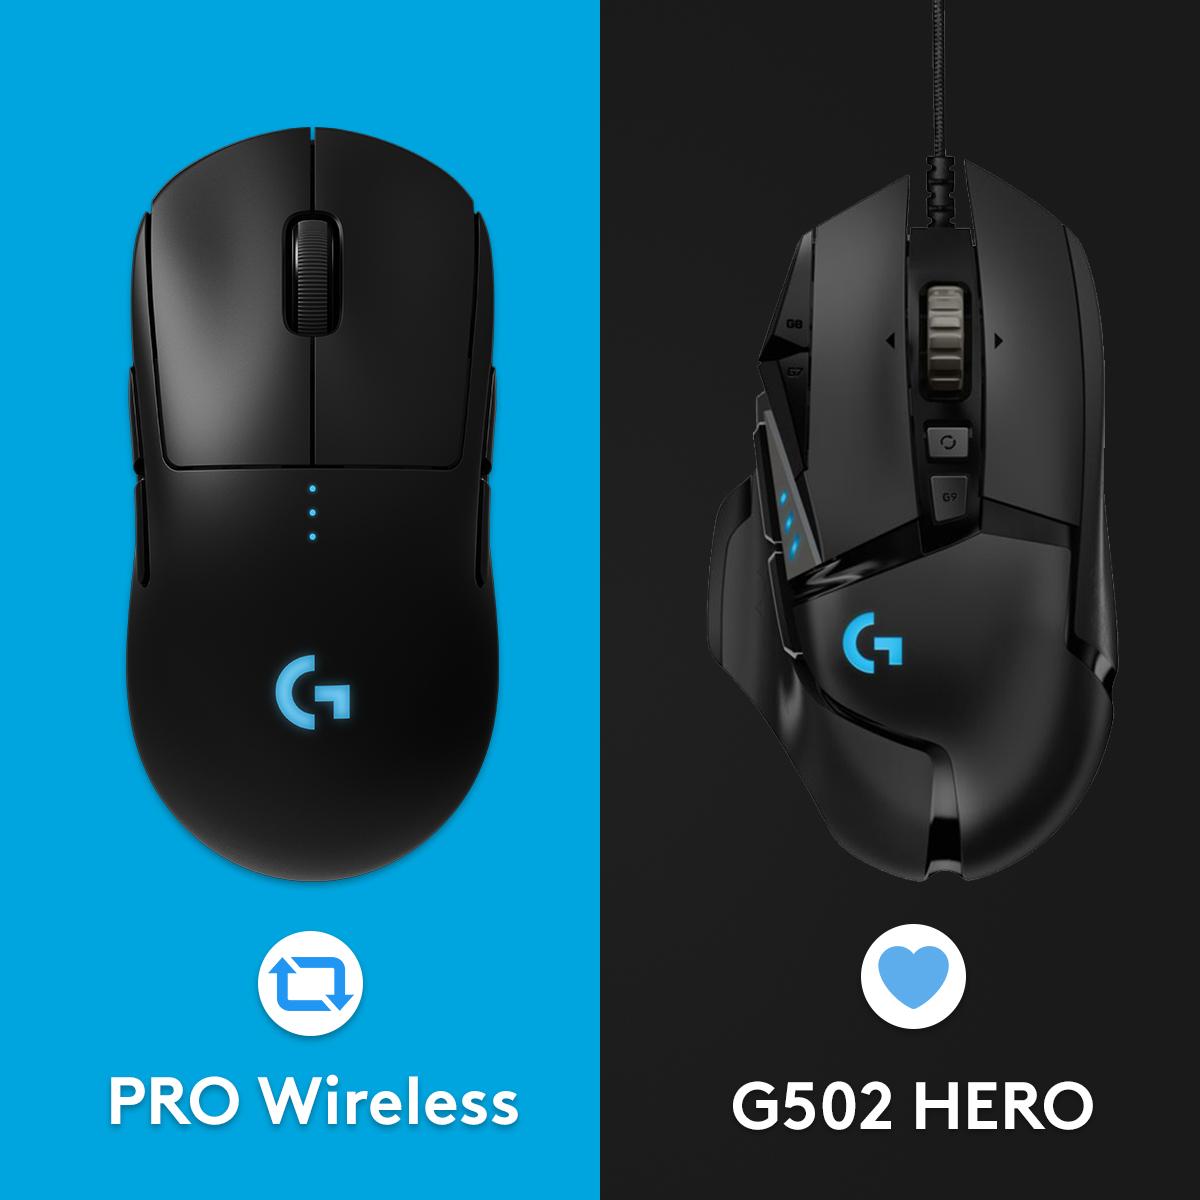 Tidlig vasketøj læbe Logitech G on Twitter: "The PRO Wireless and G502 HERO were named two of  the best wired and wireless gaming mice for 2020 by @rockpapershot, which  is your favorite? #KeepPlaying https://t.co/W6mKFH6zPK  https://t.co/NBrOX1kl9E" /